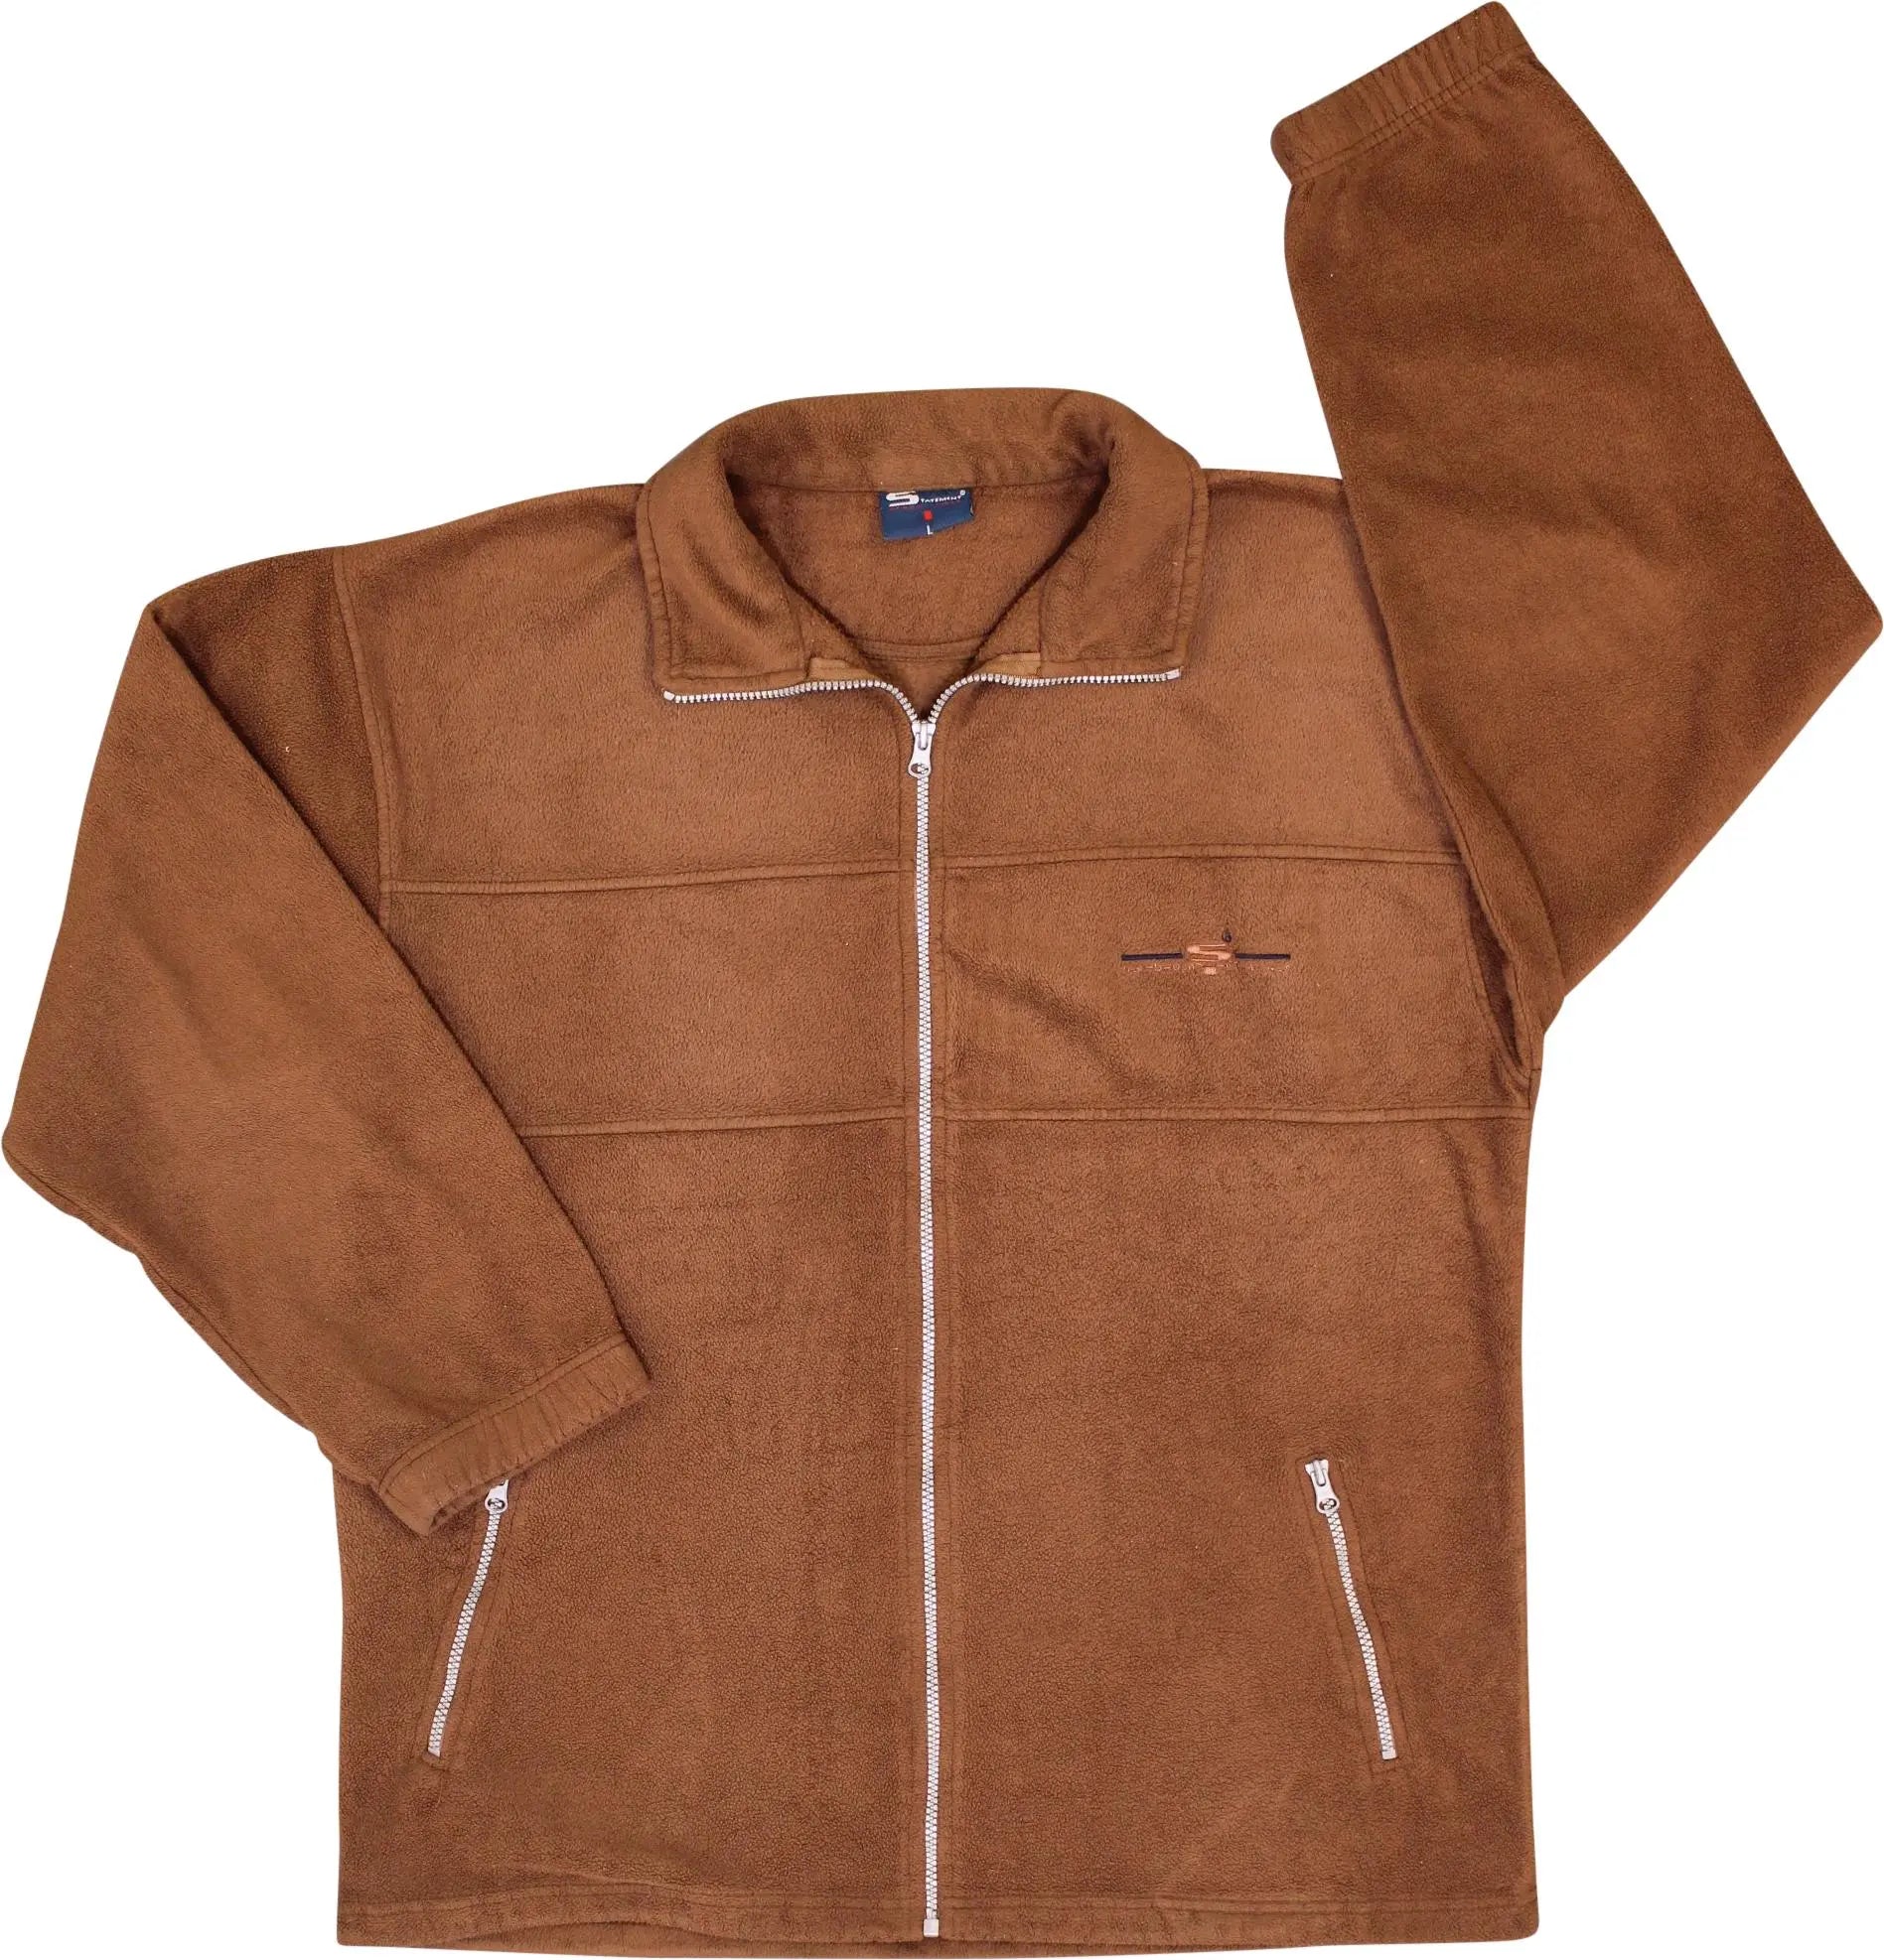 Statement Urban Vibes - Brown Fleece Zip-up- ThriftTale.com - Vintage and second handclothing